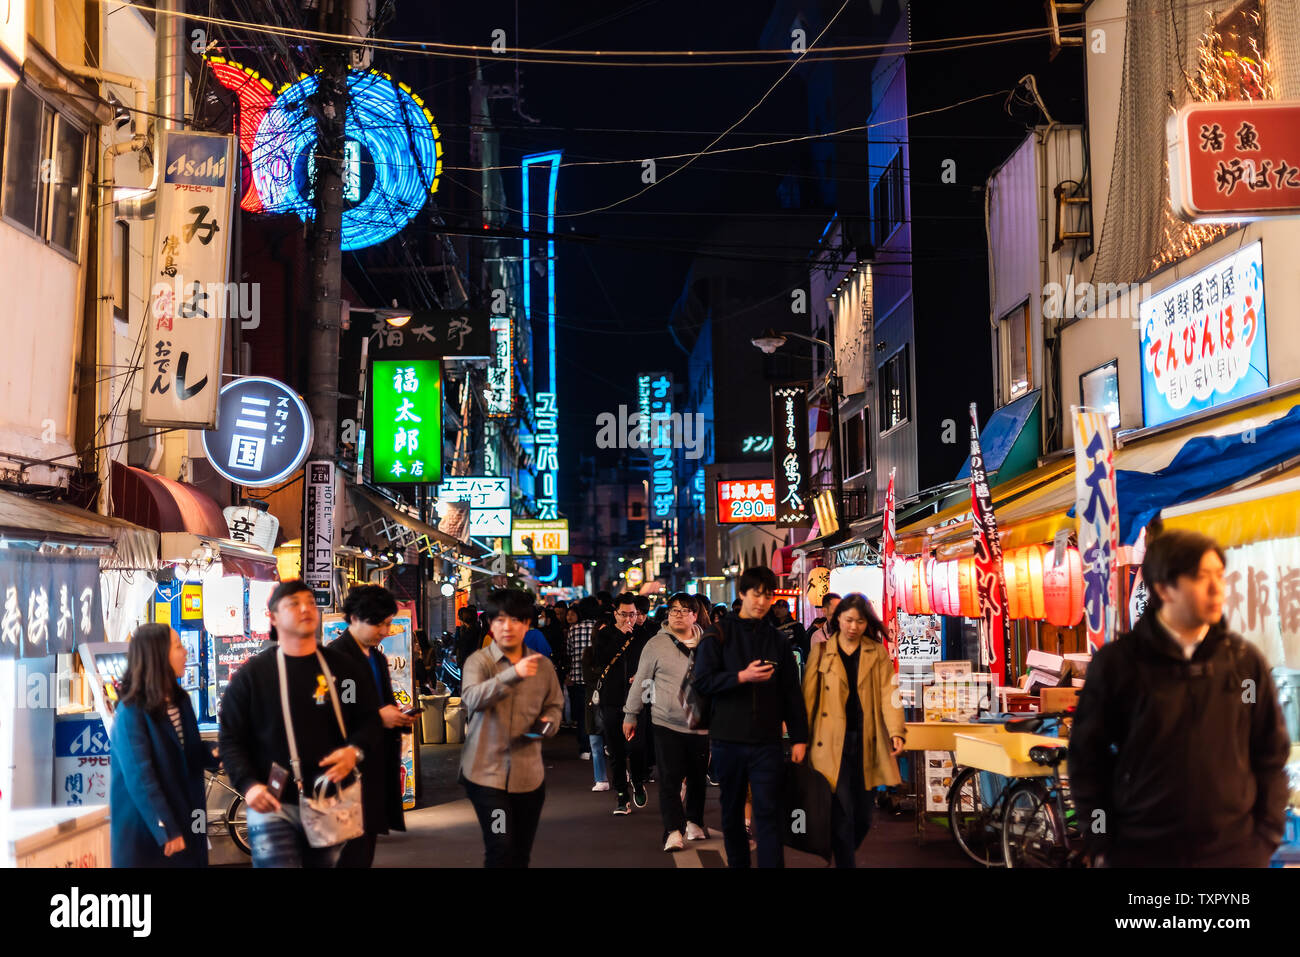 Osaka, Japan - April 13, 2019: Minami Namba street with people walking in dark night and illuminated buildings with colorful signs Stock Photo